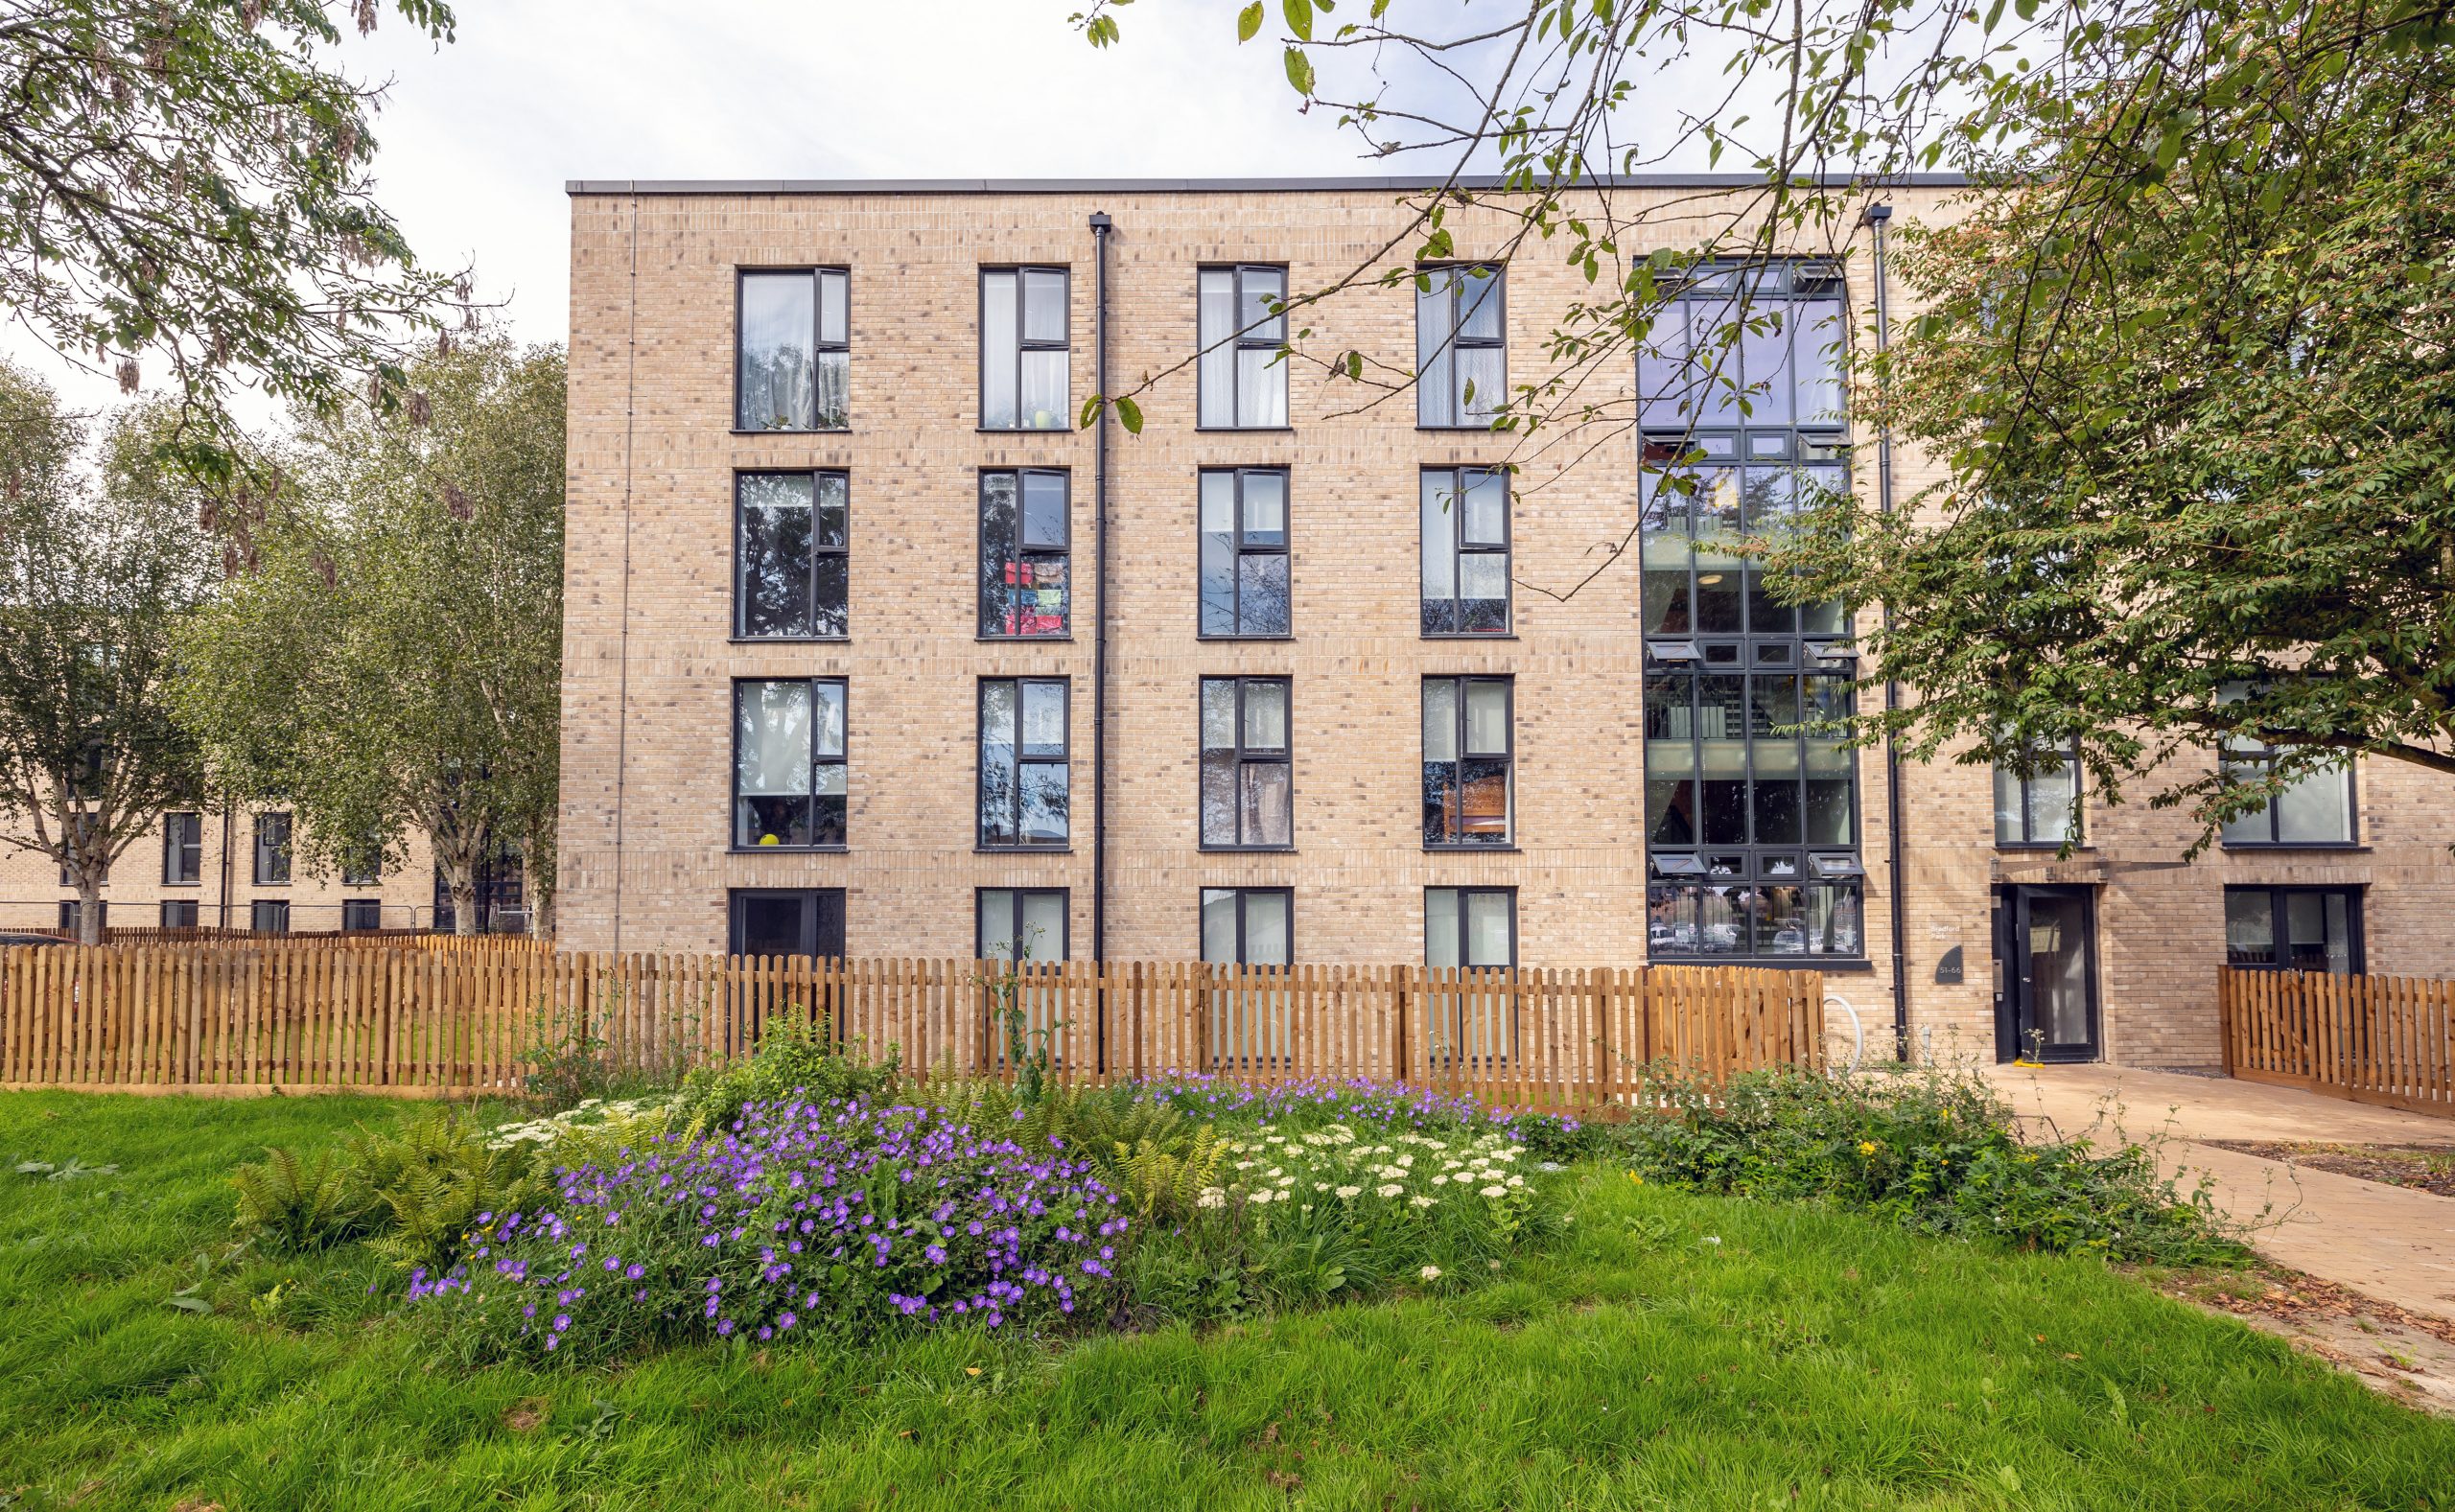 Transformation of three 1960s blocks of flats in Bath for modern, family living @bdp_com @Curo_group @MidasGroupUK